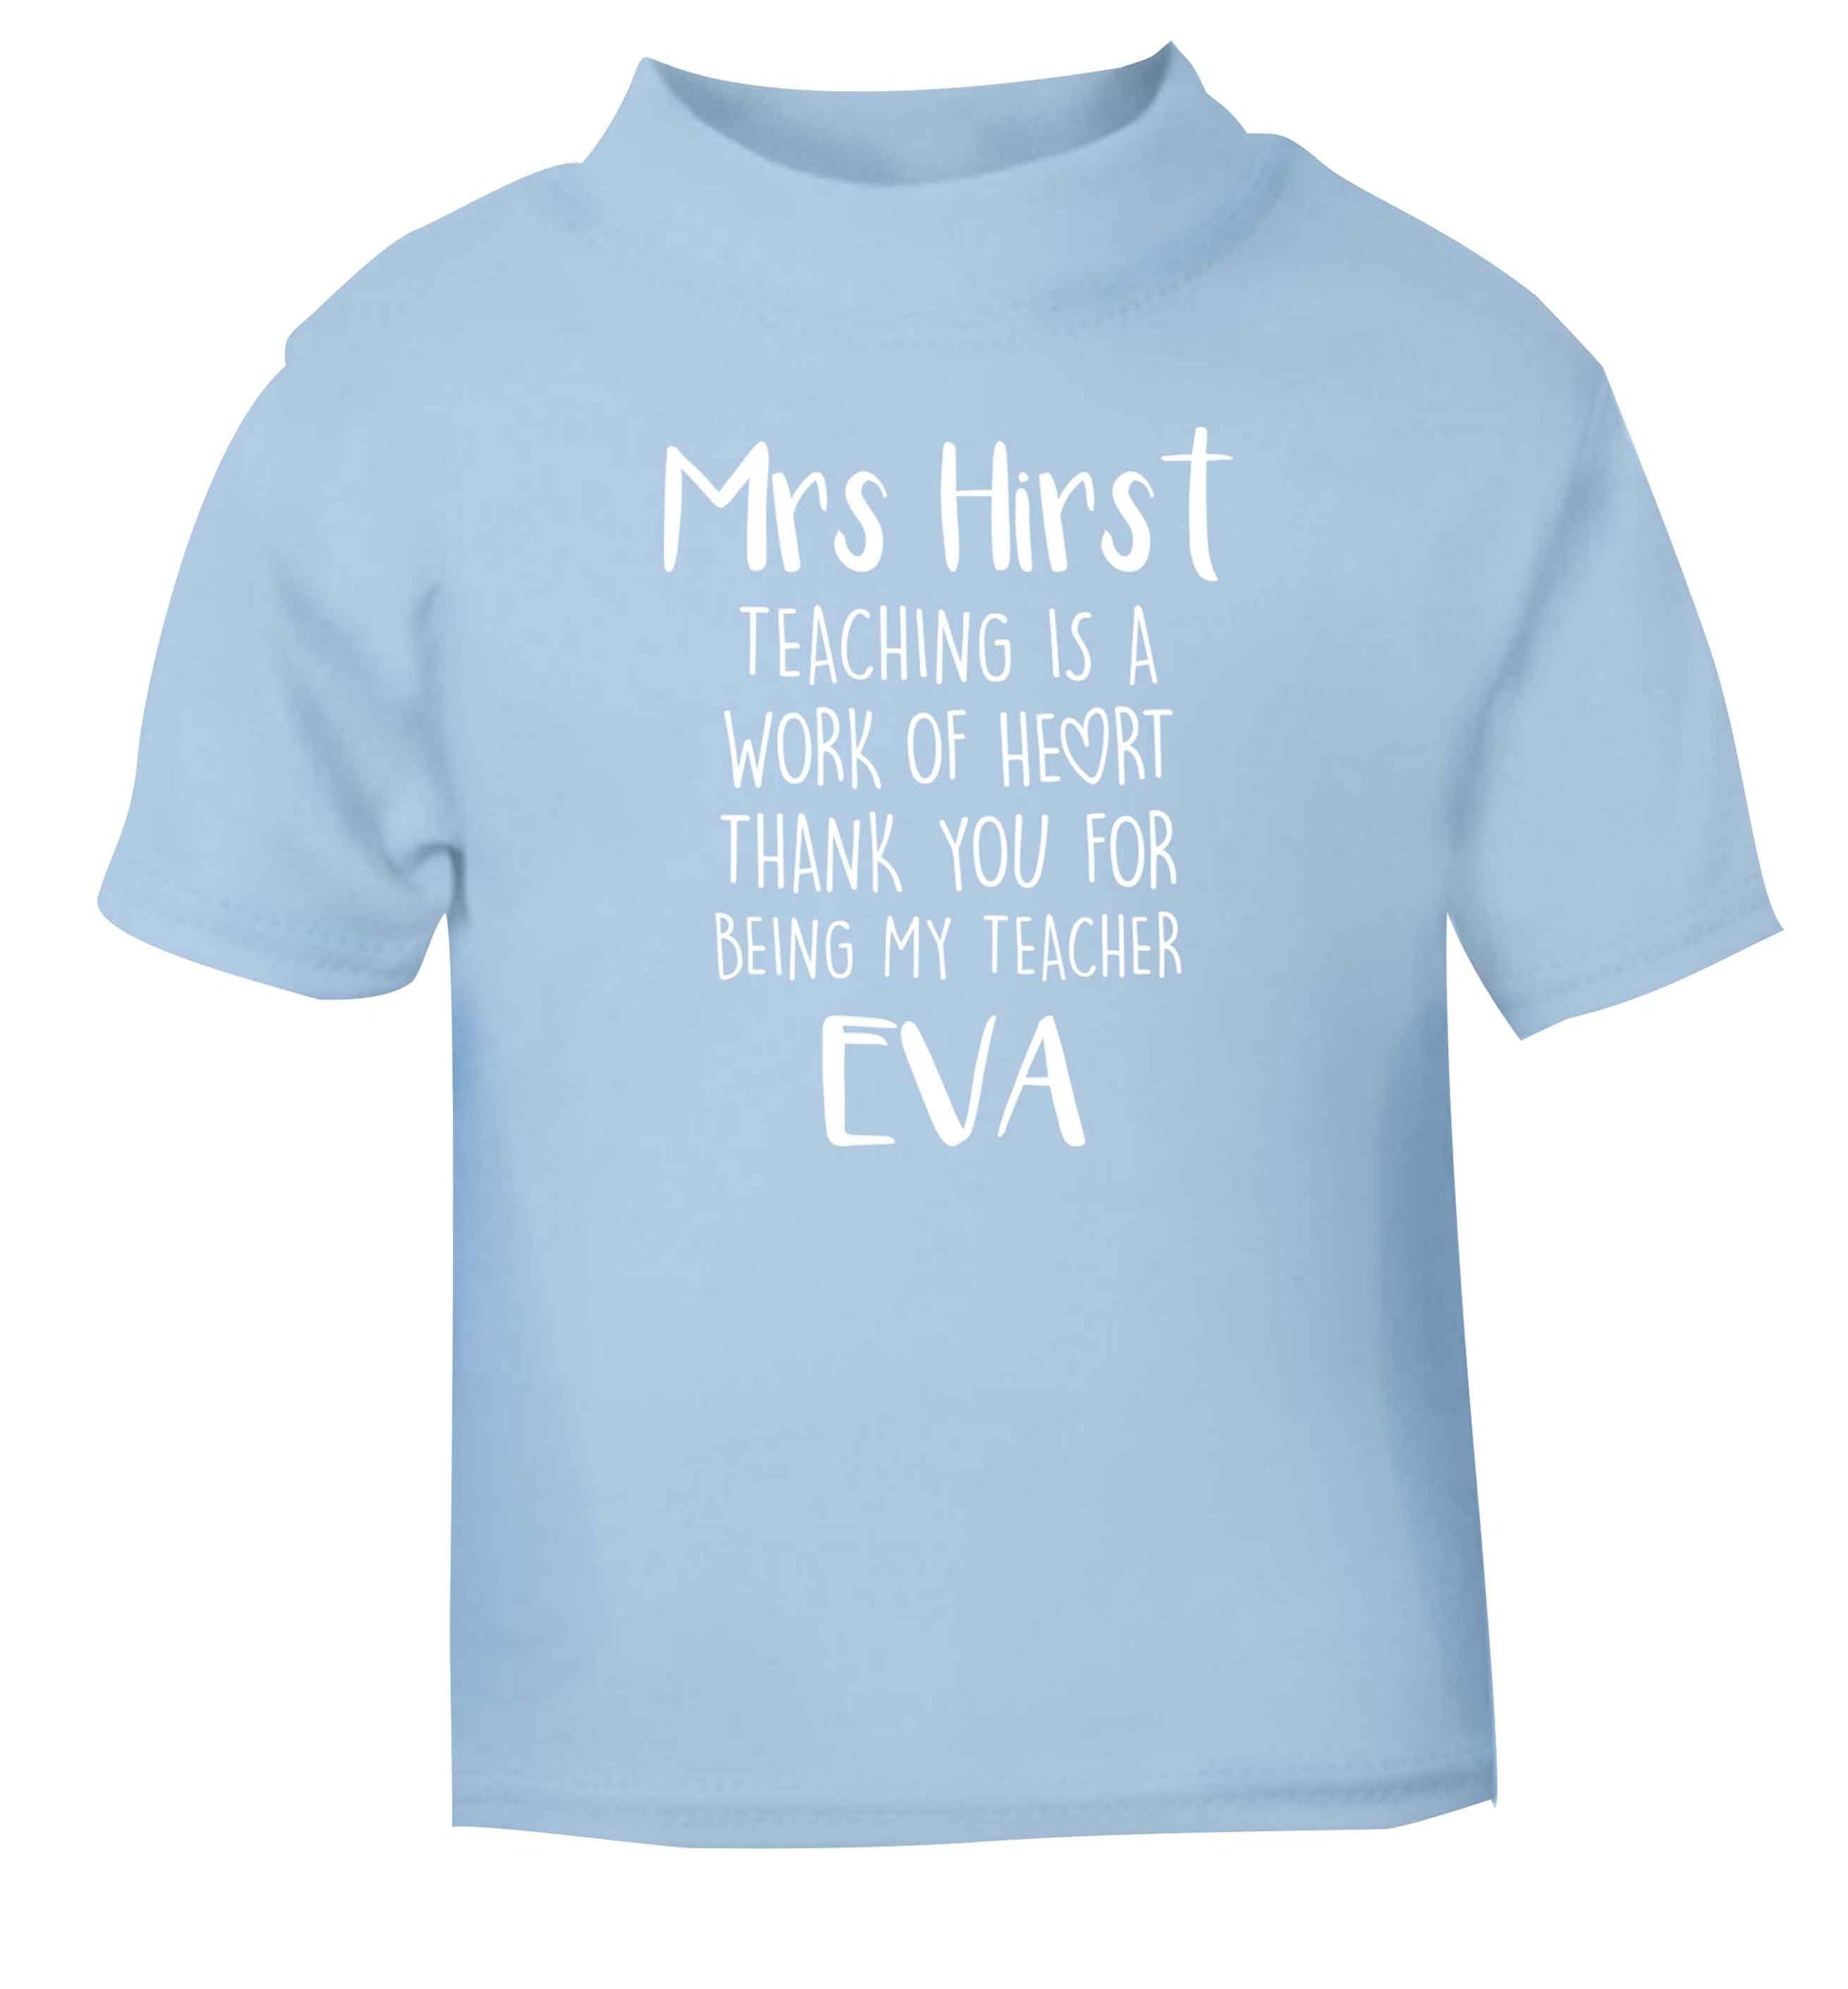 Personalised teaching is a work of heart thank you for being my teacher light blue Baby Toddler Tshirt 2 Years